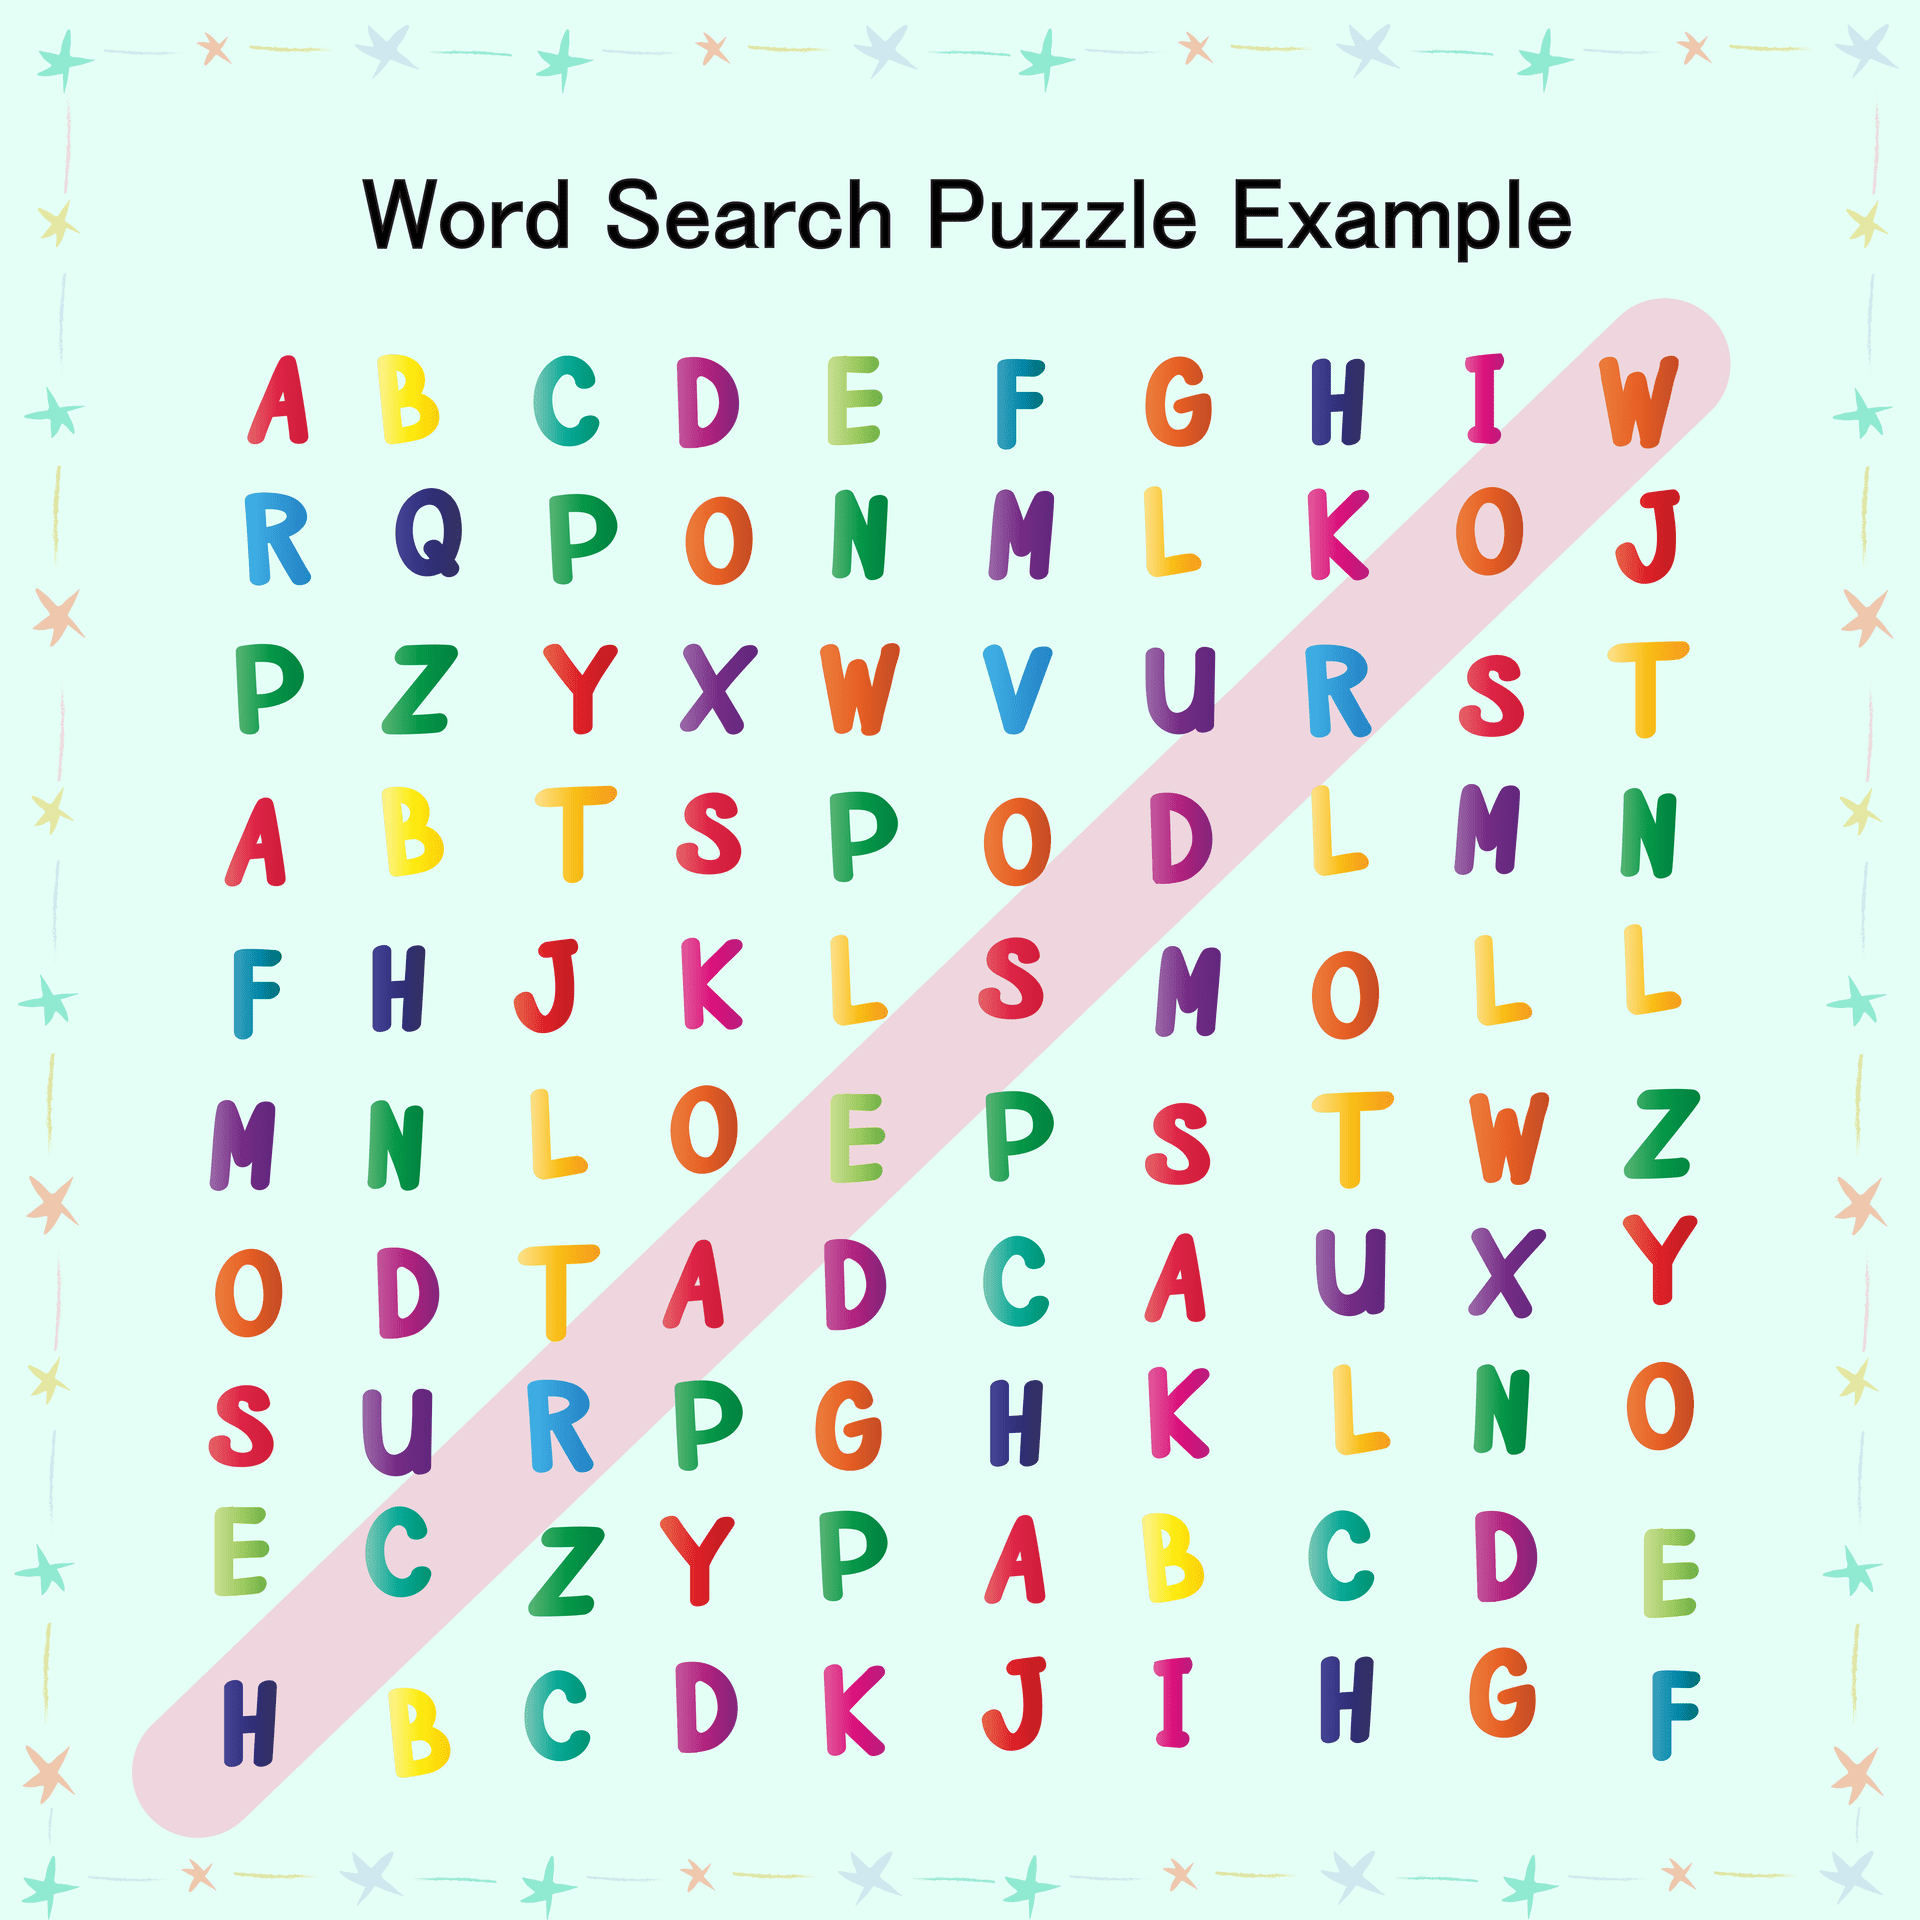 Using example to describe Word Search Puzzle 